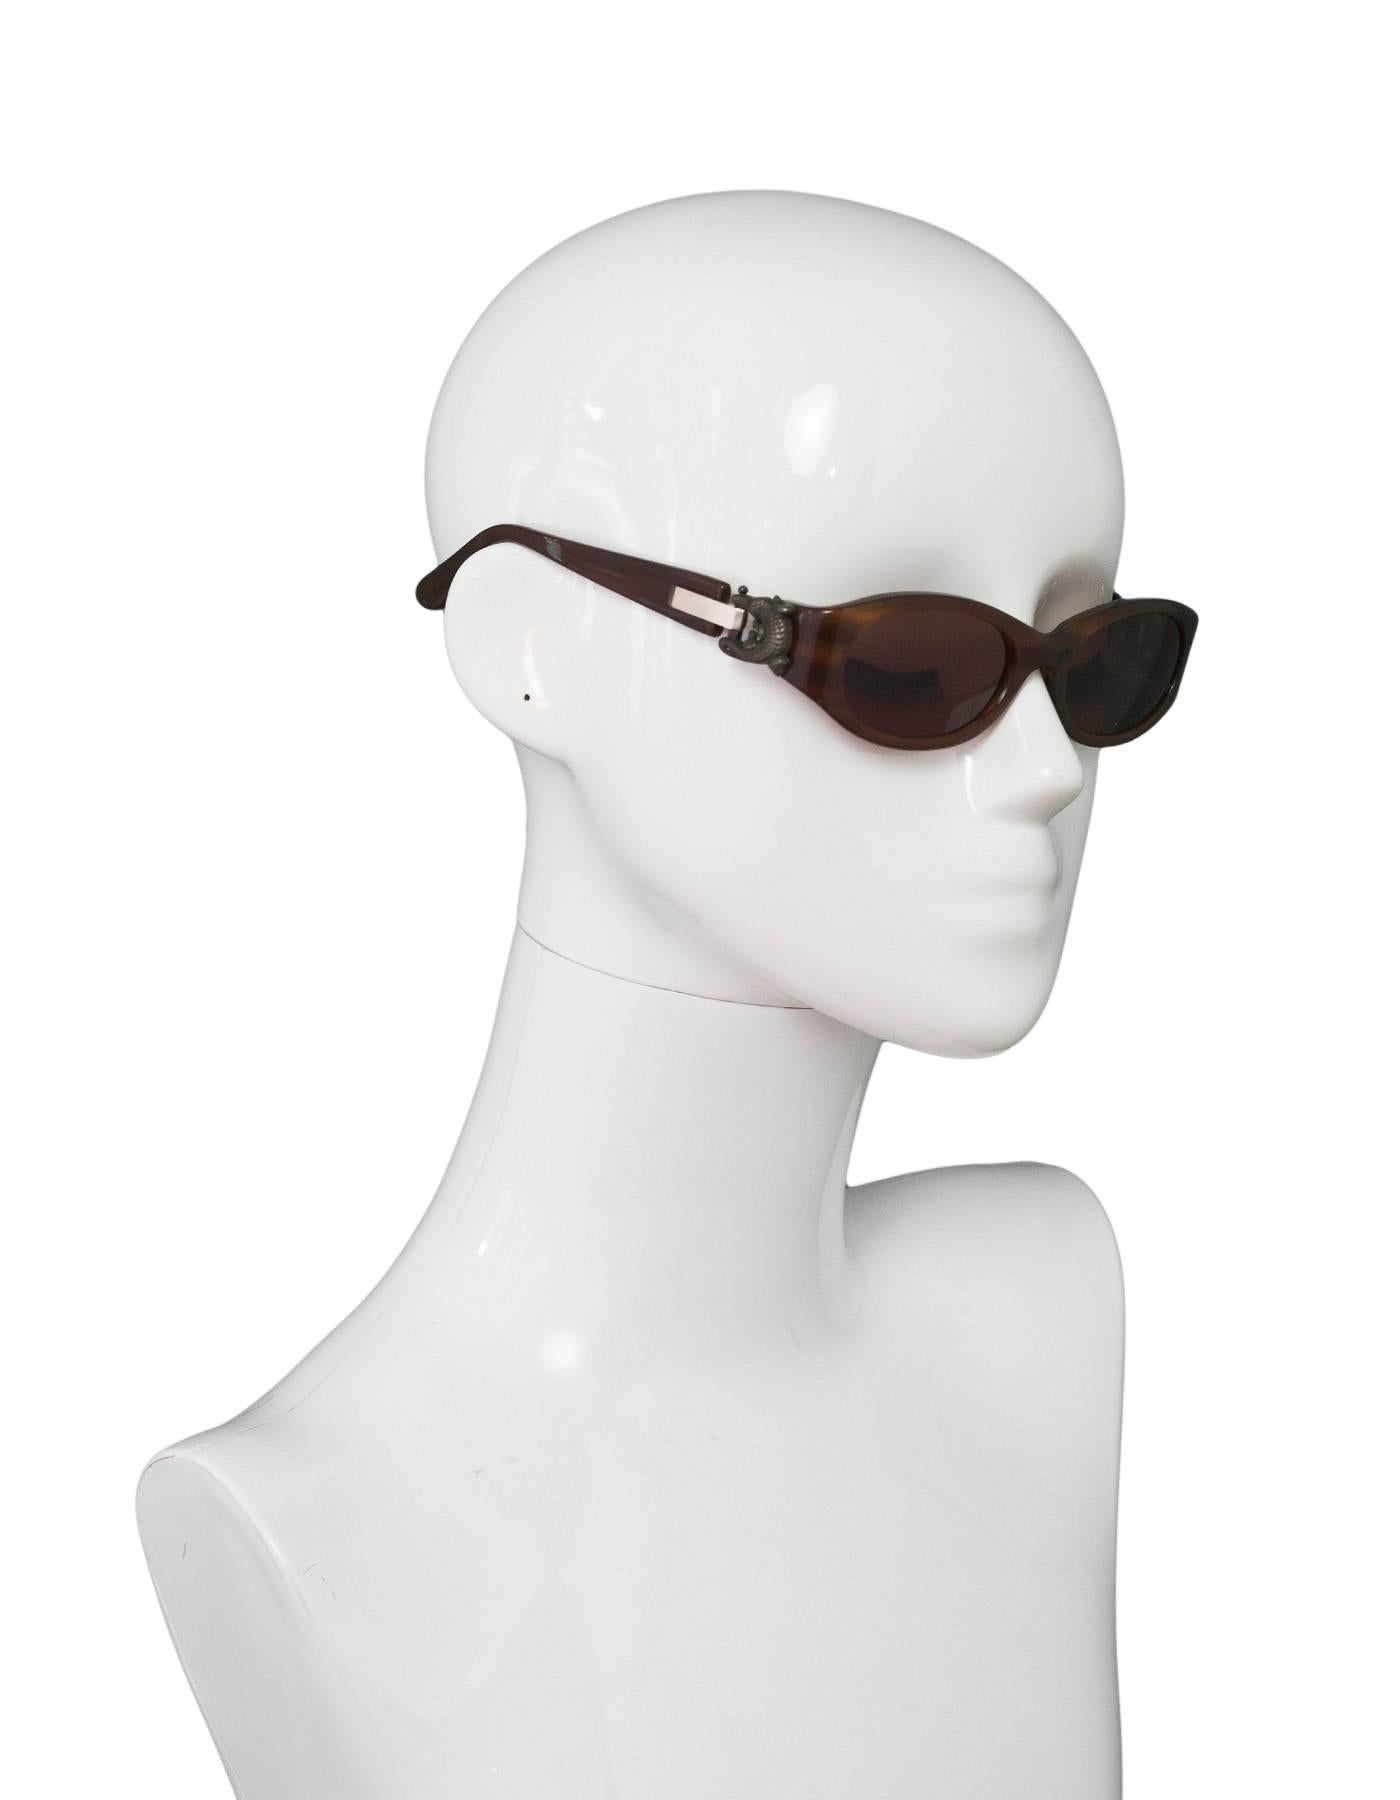 Kieselstein-Cord Brown Surrender Sunglasses
Features alligator detail at arms

Made In: Japan
Color: Brown
Materials: Resin, metal
Overall Condition: Very good pre-owned condition, some tarnishing at hardware, marks and wear at resin
Included: